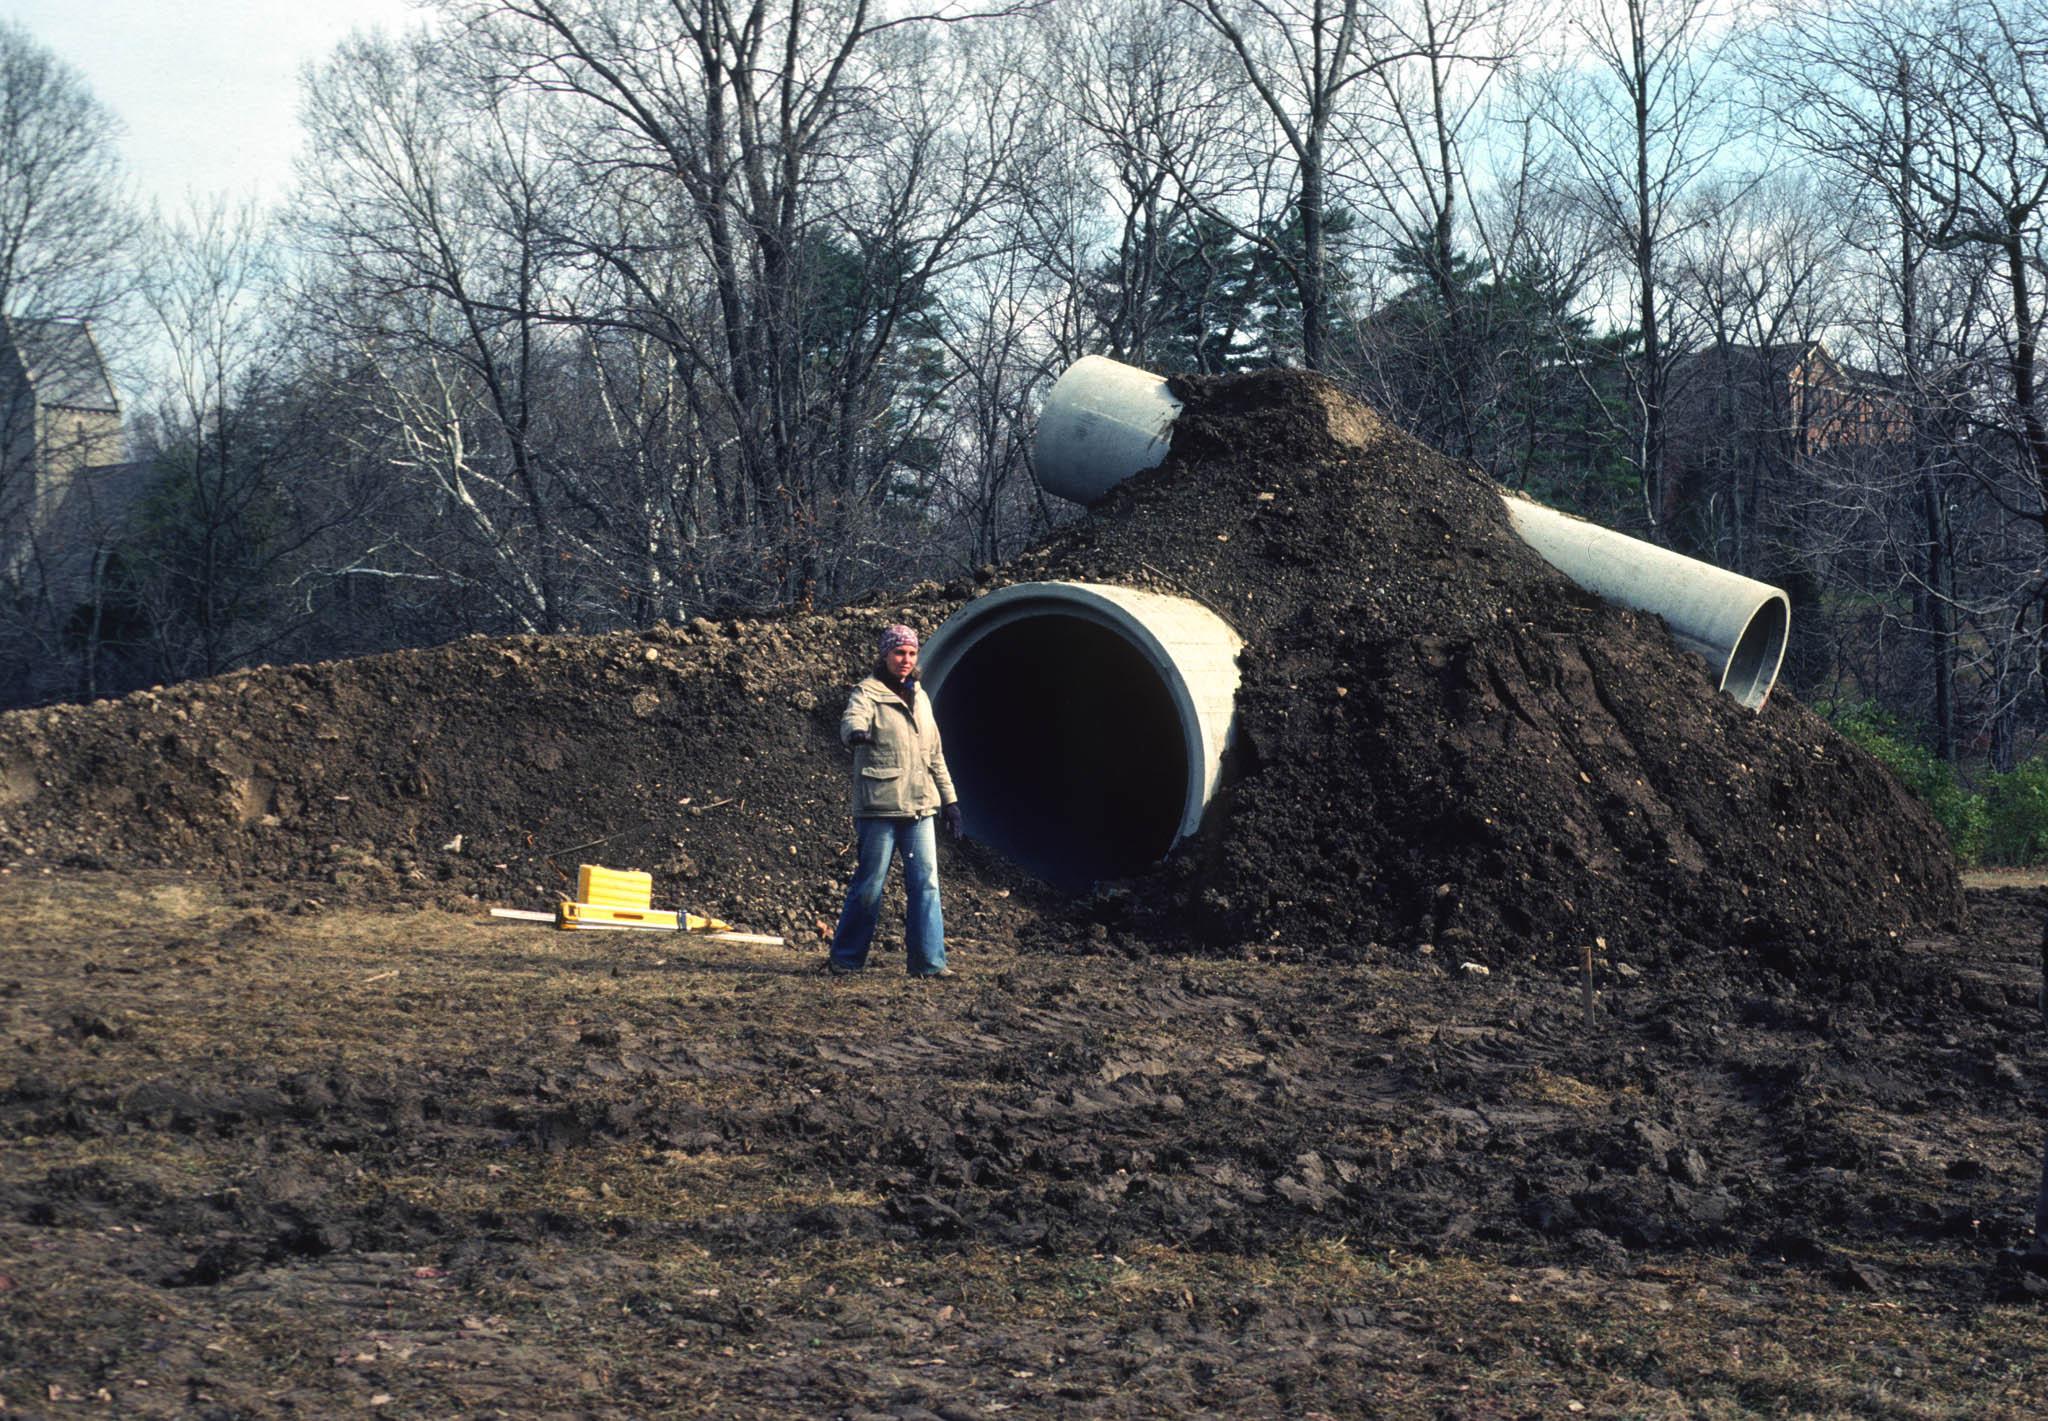 Nancy Holt during the construction of Star-Crossed (1979-80)